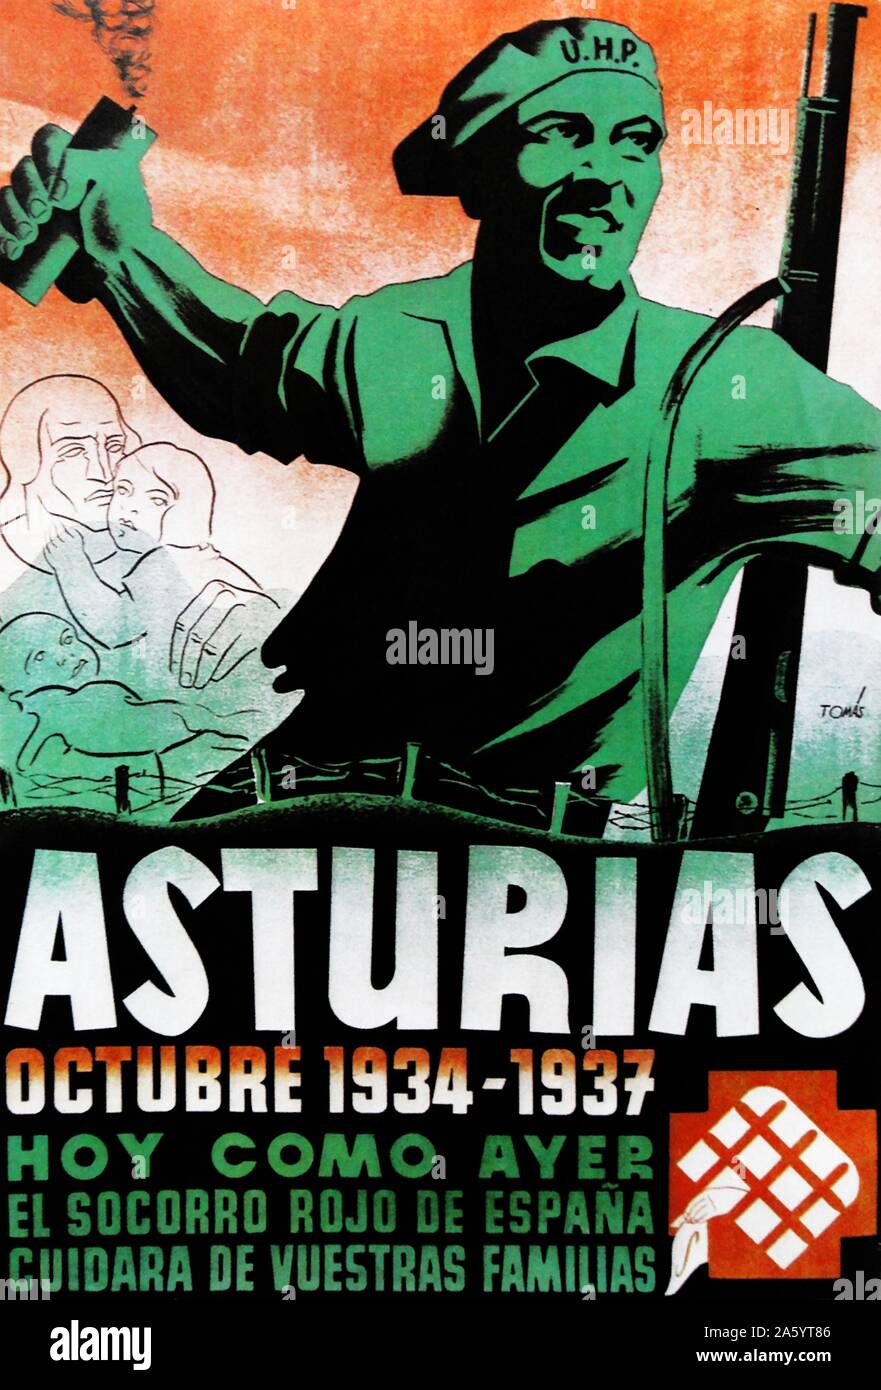 Republican Spanish poster to recall the Asturias Revolution of 1934. The Asturian miners' strike of 1934 was a major strike action, against the entry of the Spanish Confederation of the Autonomous Right (CEDA) into the Spanish government, which took place in Asturias in northern Spain, that developed into a revolutionary uprising. It was crushed by the Spanish Navy and the Spanish Republican Army, Stock Photo